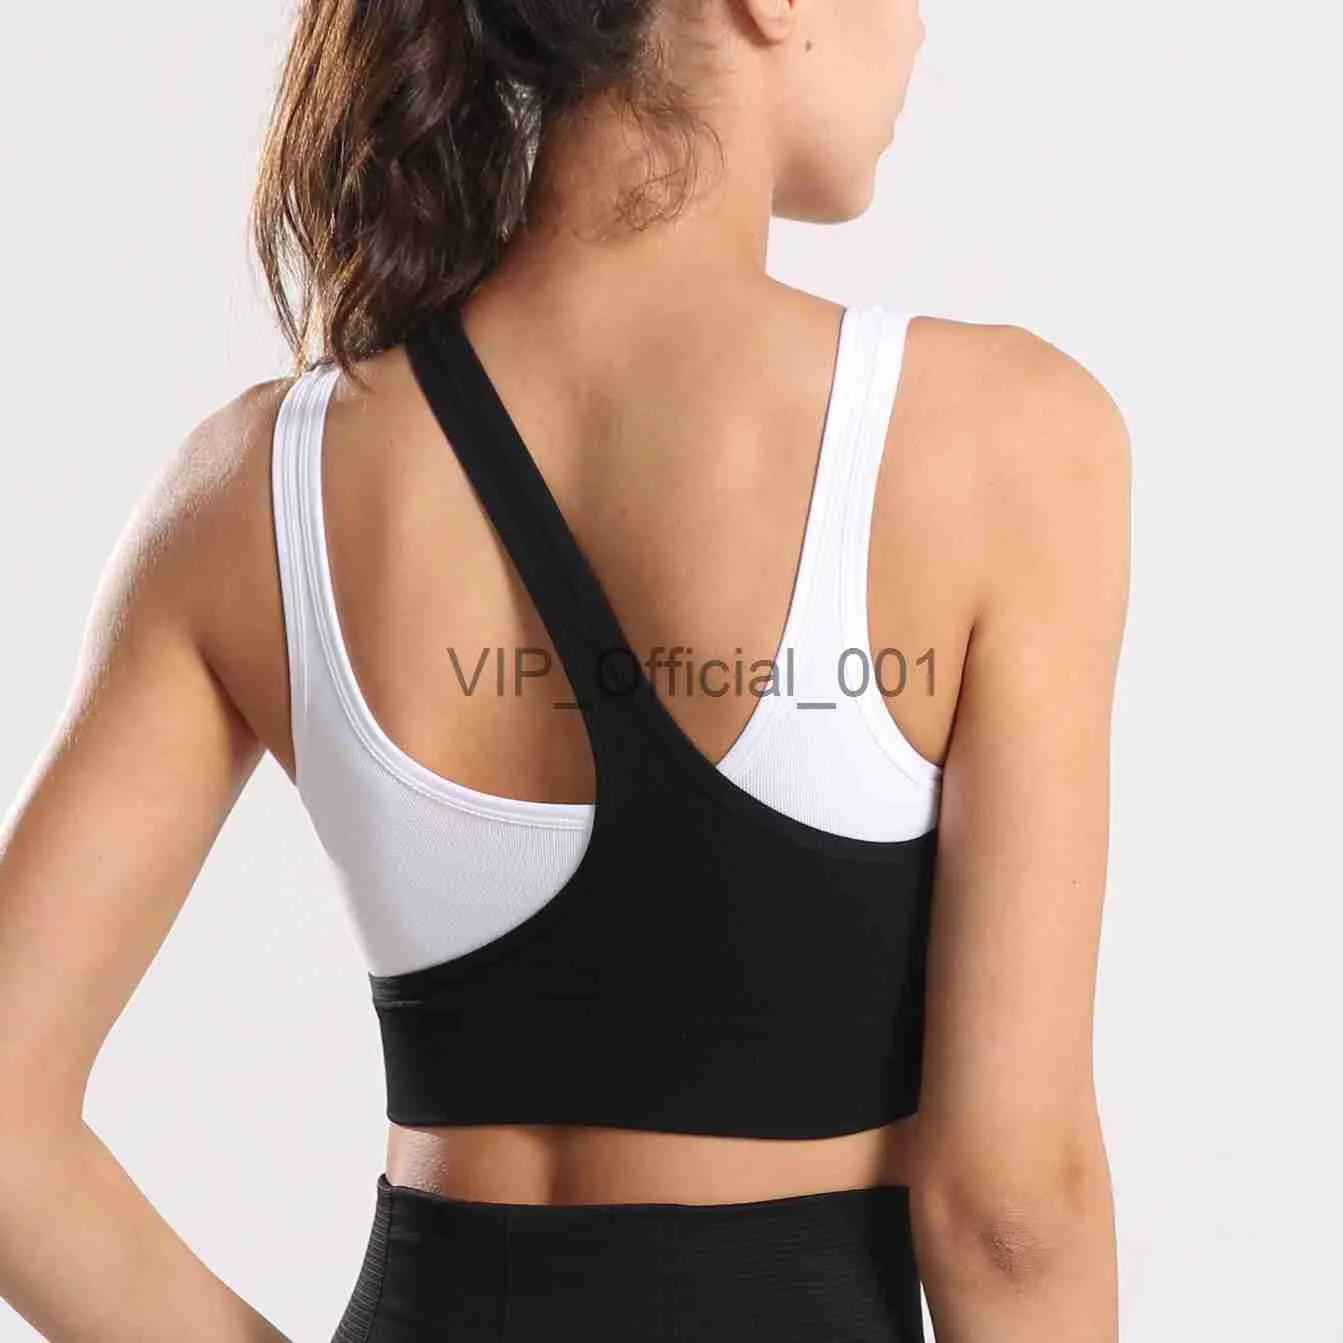 2022 Womens Seamless Racerback Wunderlove Sports Bra With Removable Pads  Cross Back, Wirefree, Patchwork Design For Yoga, Running, Fitness, And Gym  Style X0822 From Vip_official_001, $11.71